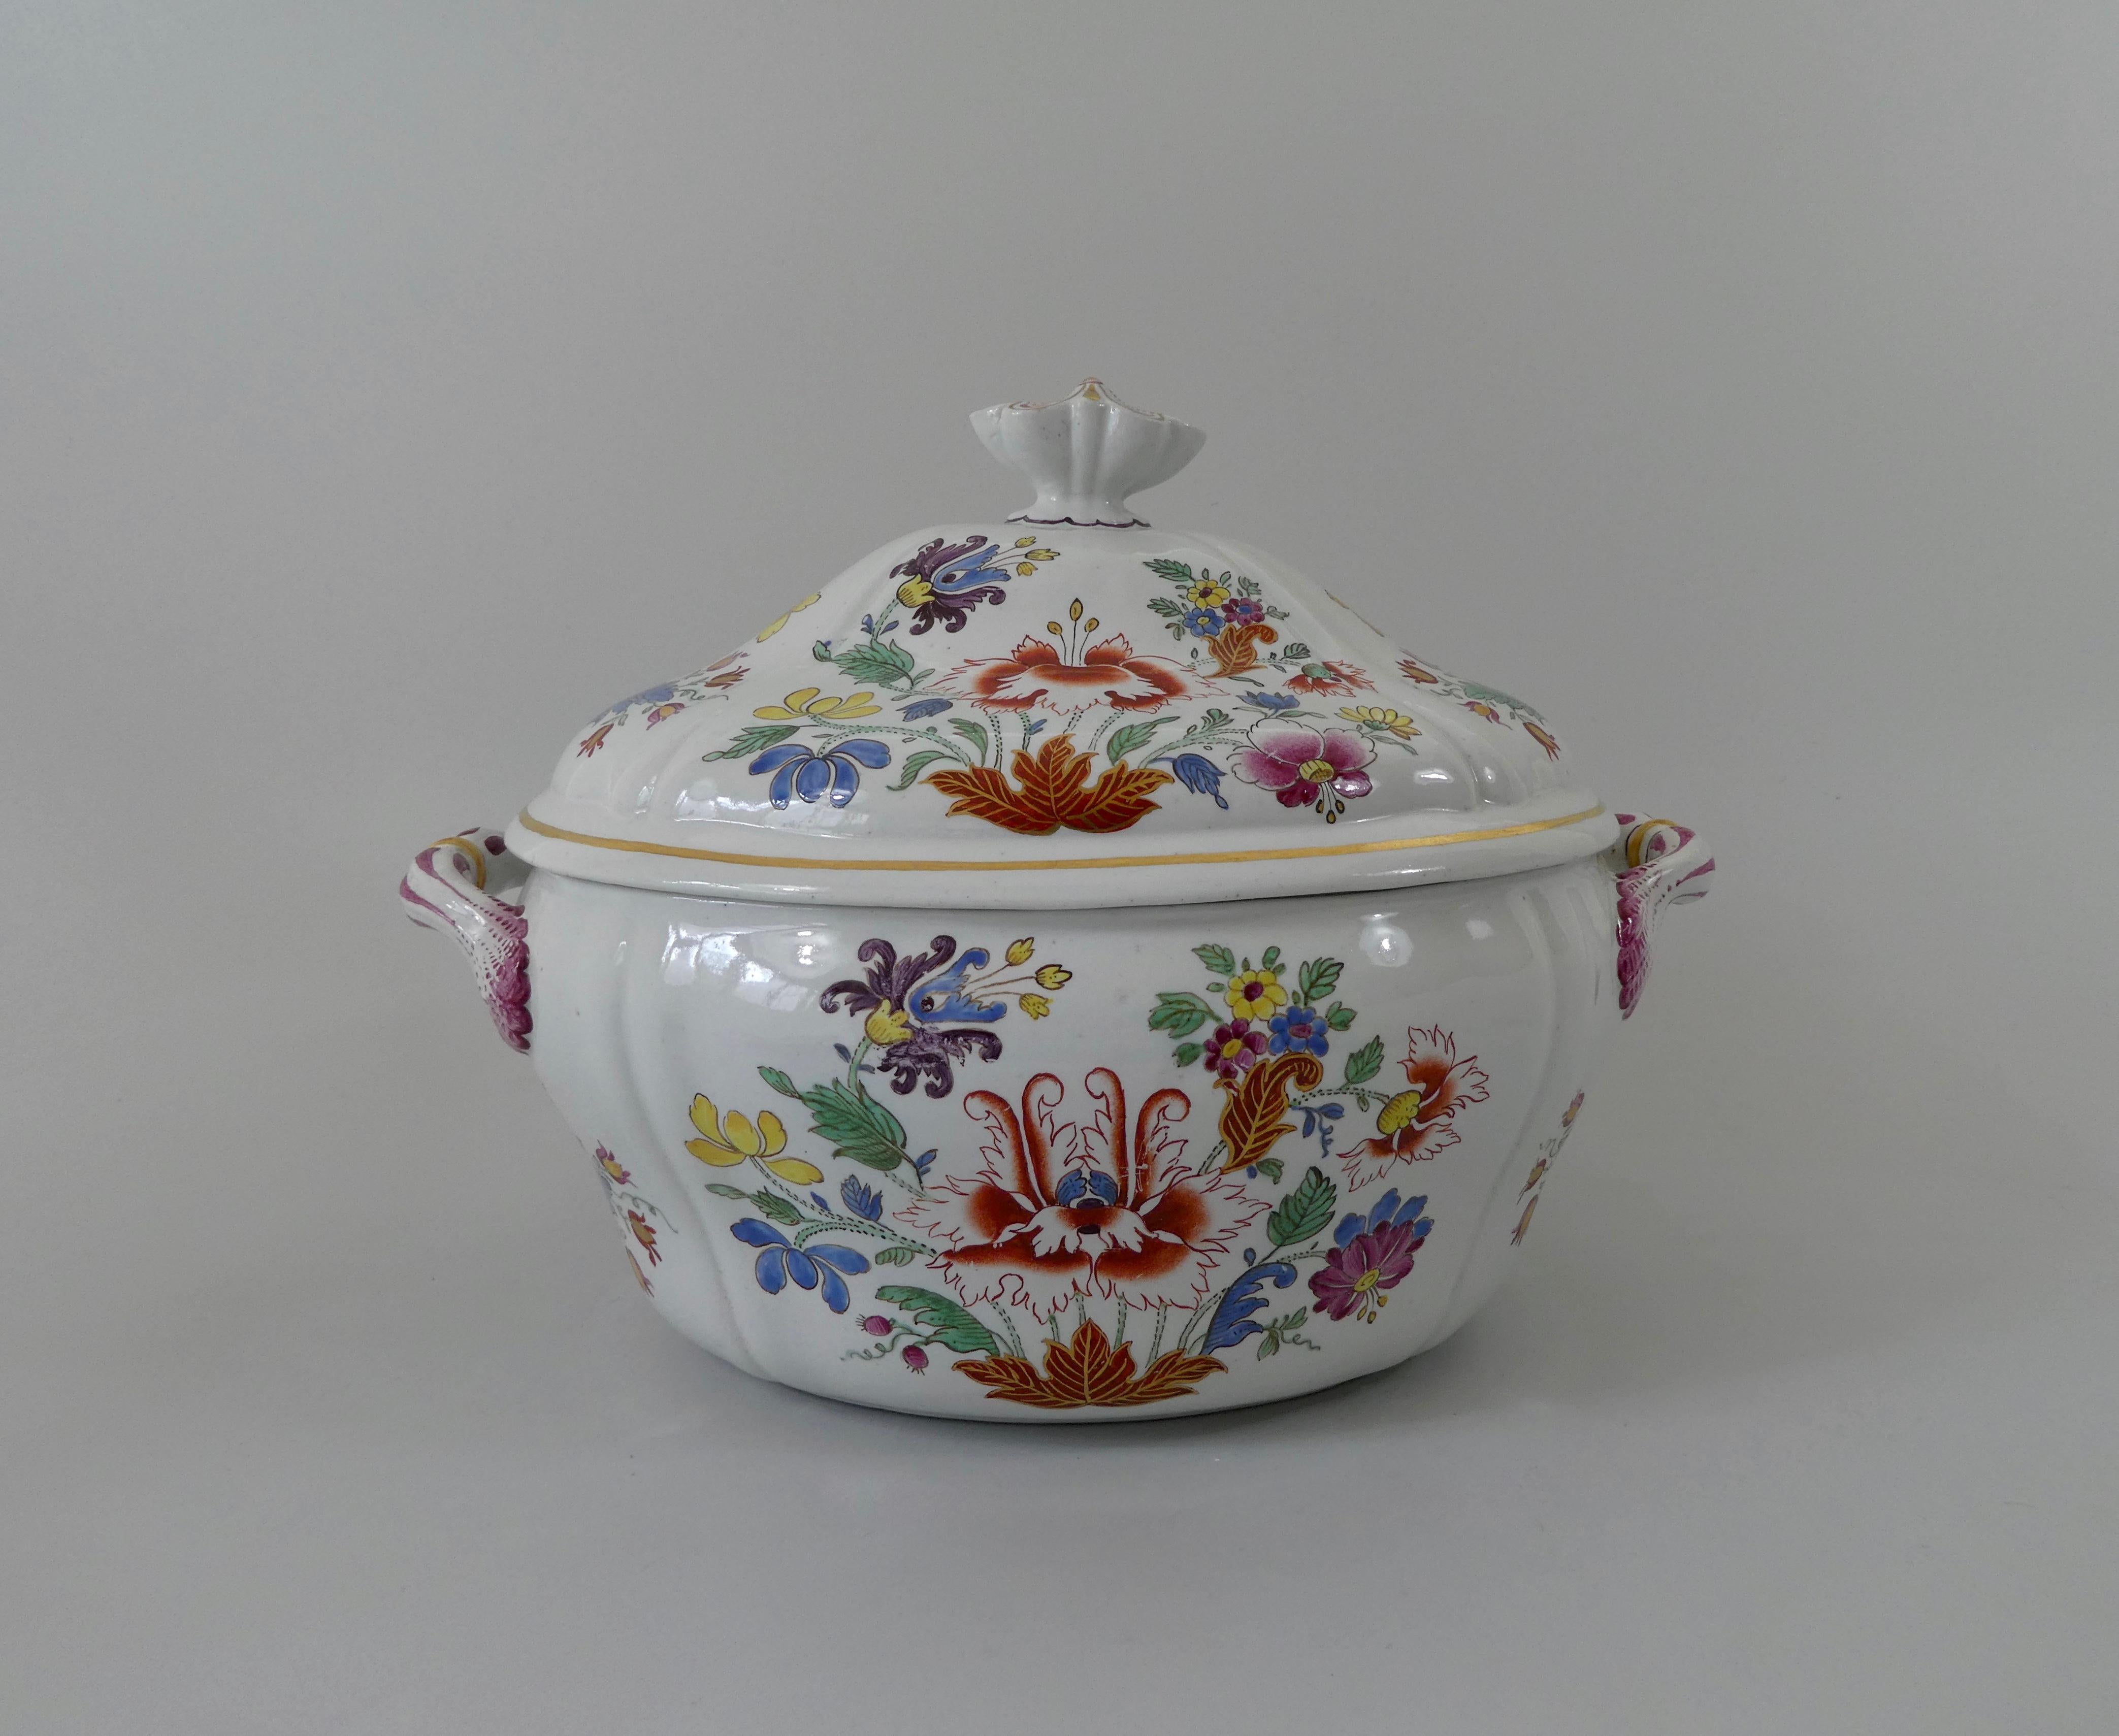 Doccia Porcelain Tureen, Cover and Stand, Tulipano Pattern, circa 1770 5